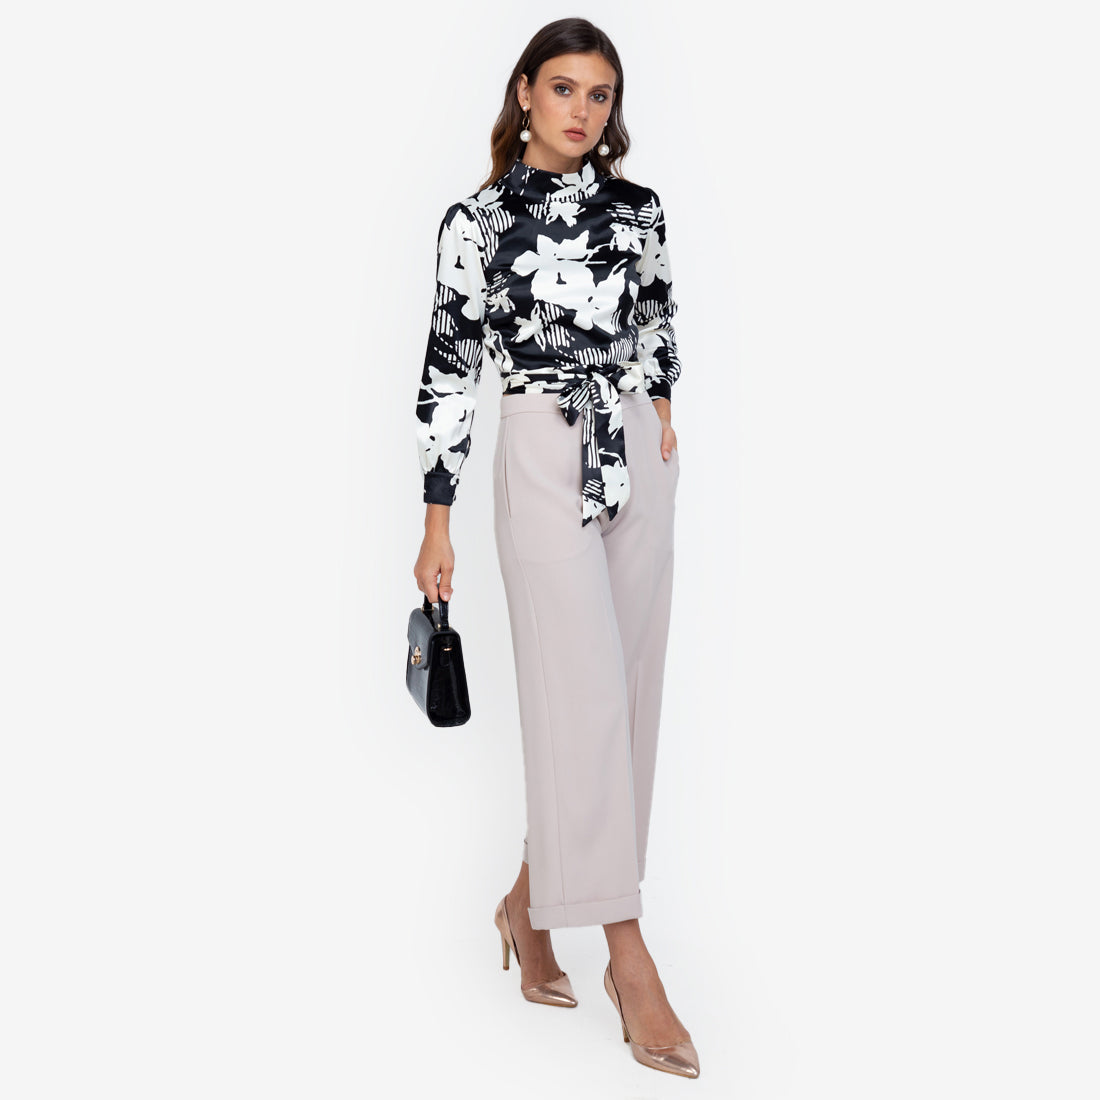 Riana Backless Blouse in Floral Prints